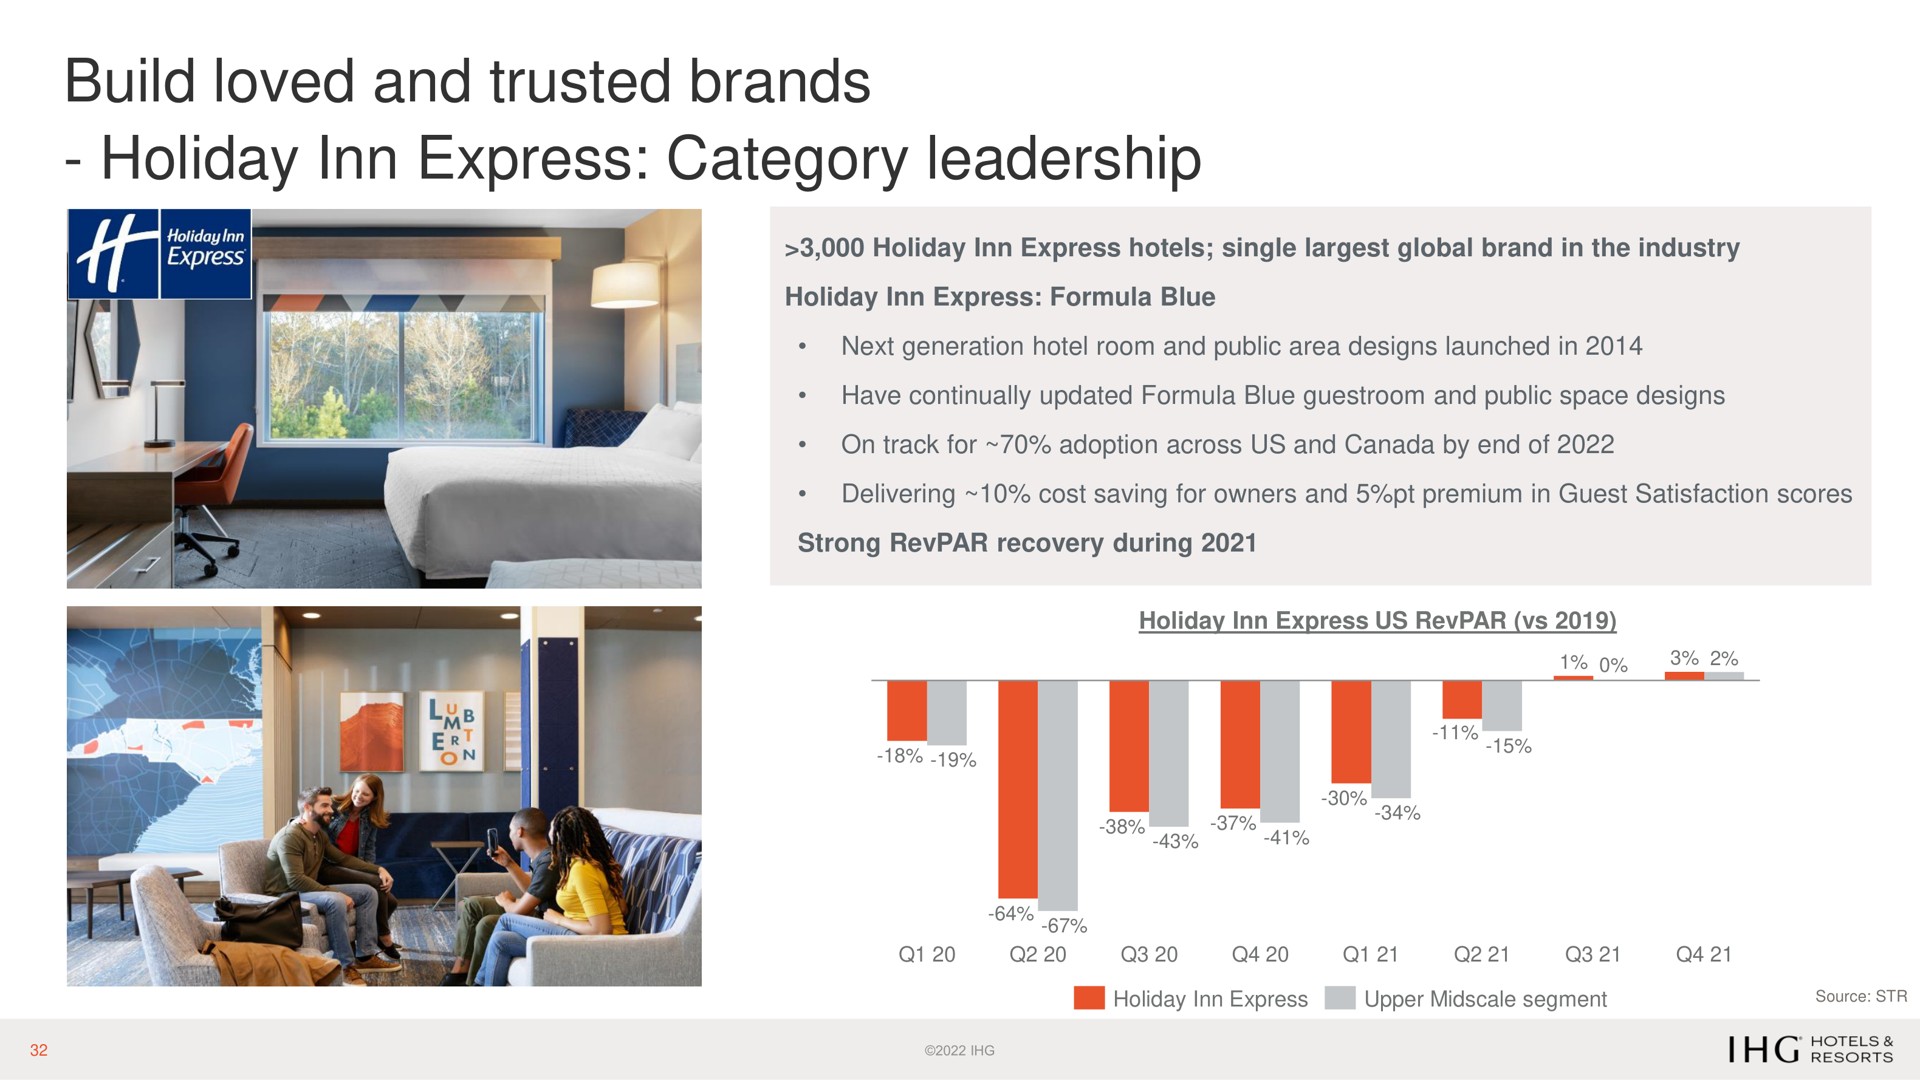 build loved and trusted brands holiday inn express category leadership | IHG Hotels